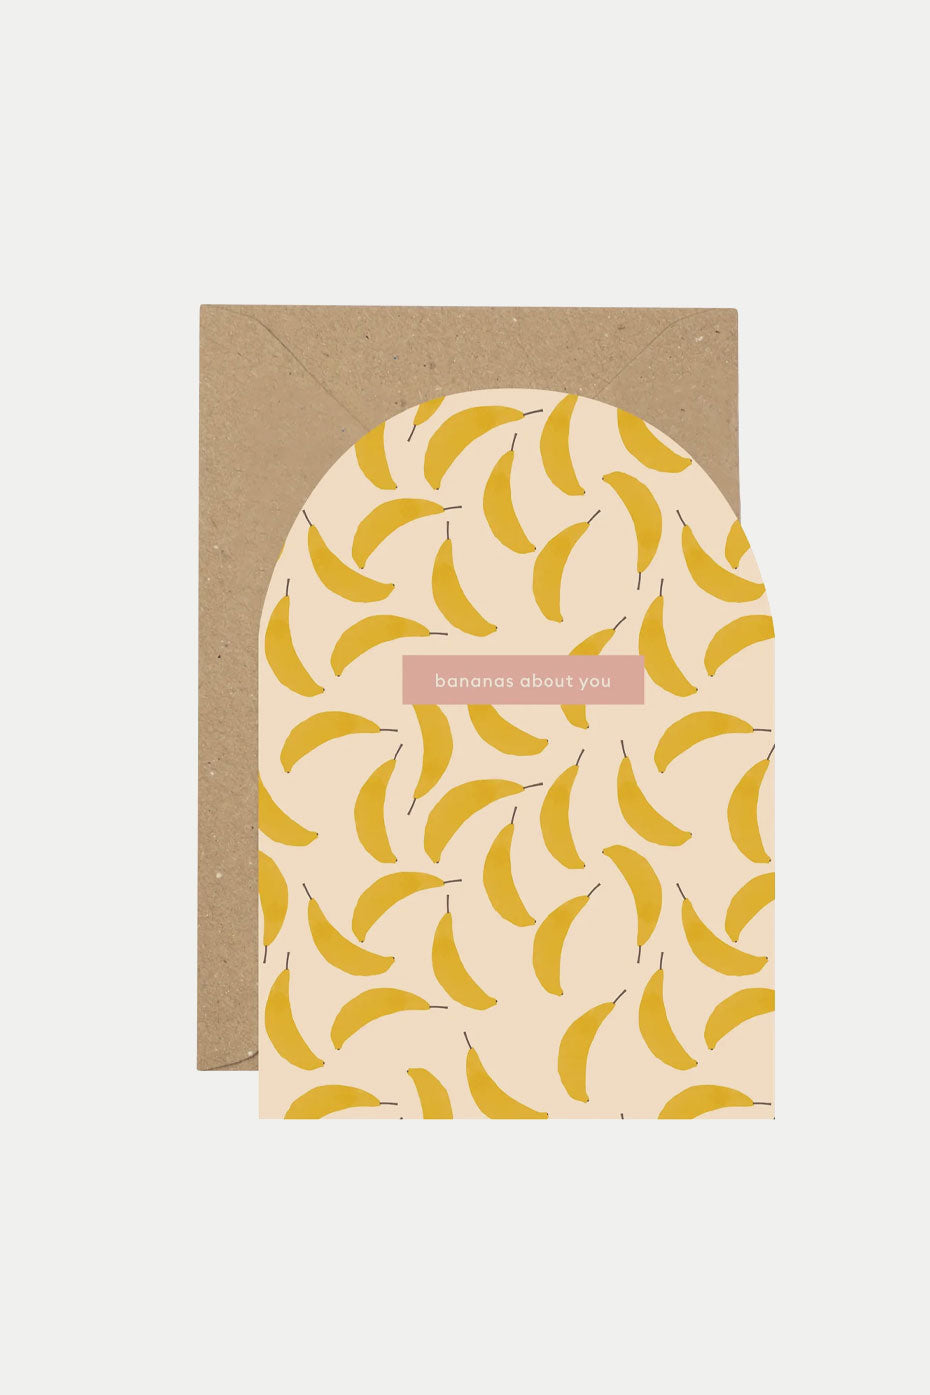 Plewsy 'bananas About You' Curved Card